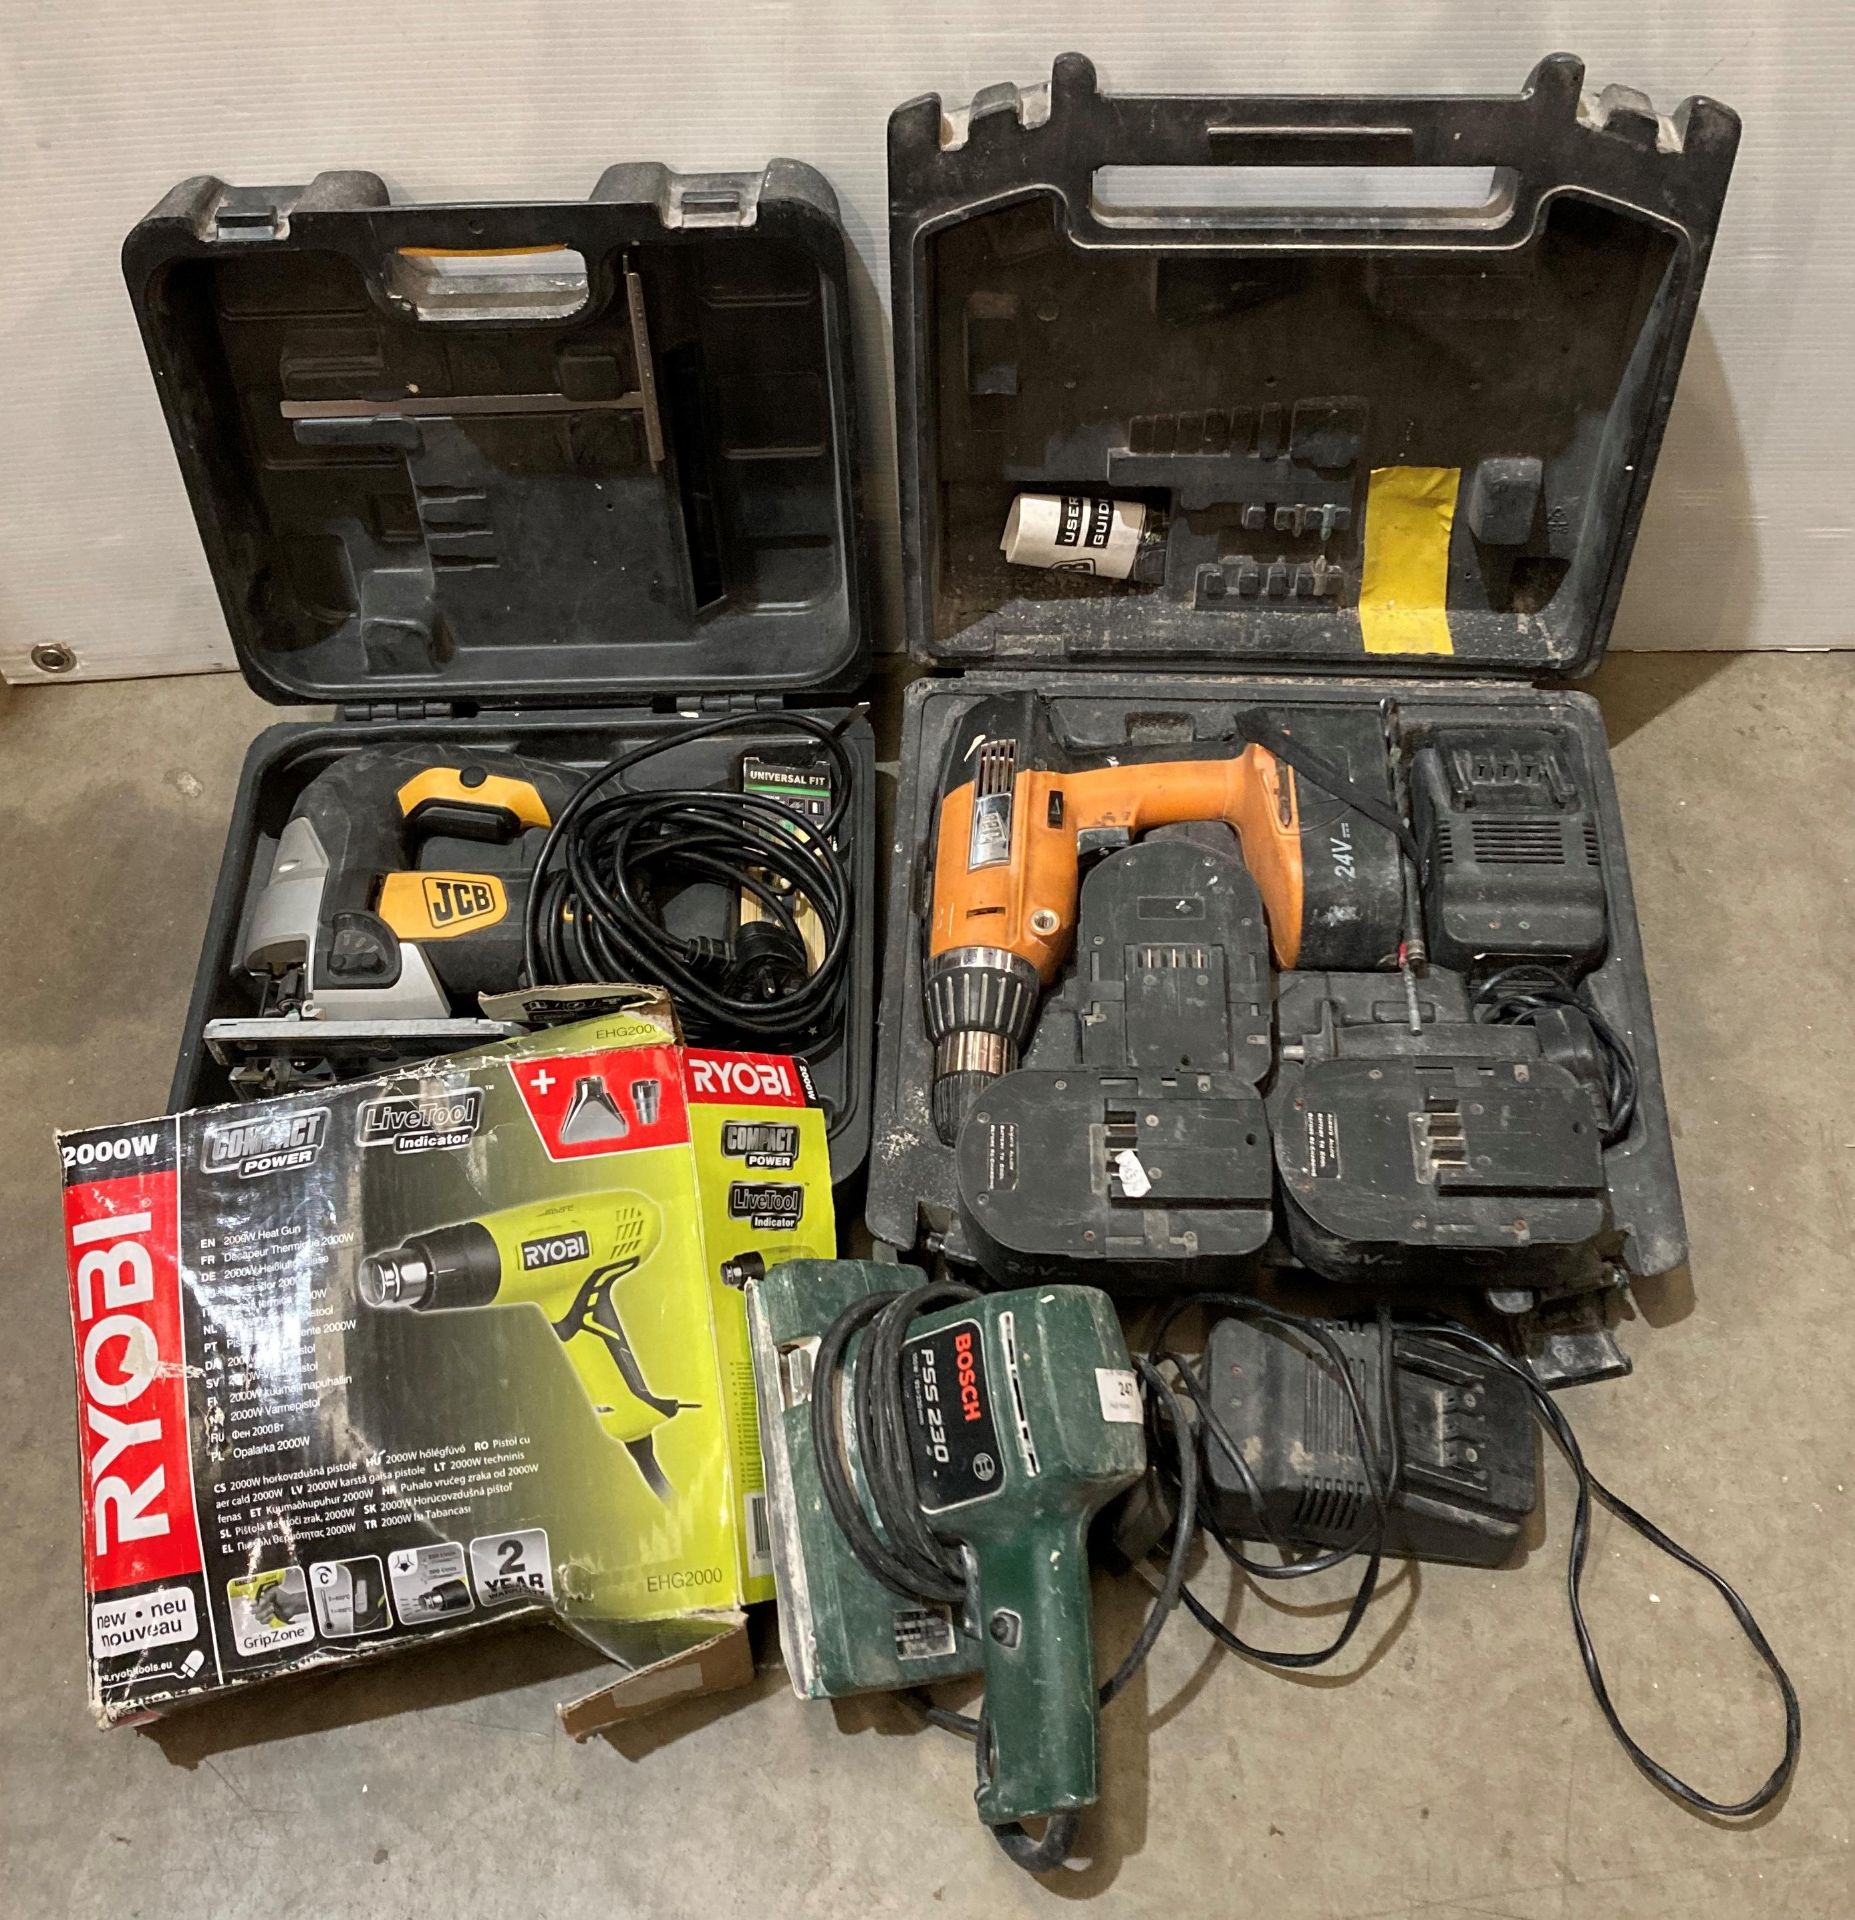 A JBC 24v cordless drill in case complete with 2 x batteries and charger (and spare charger and